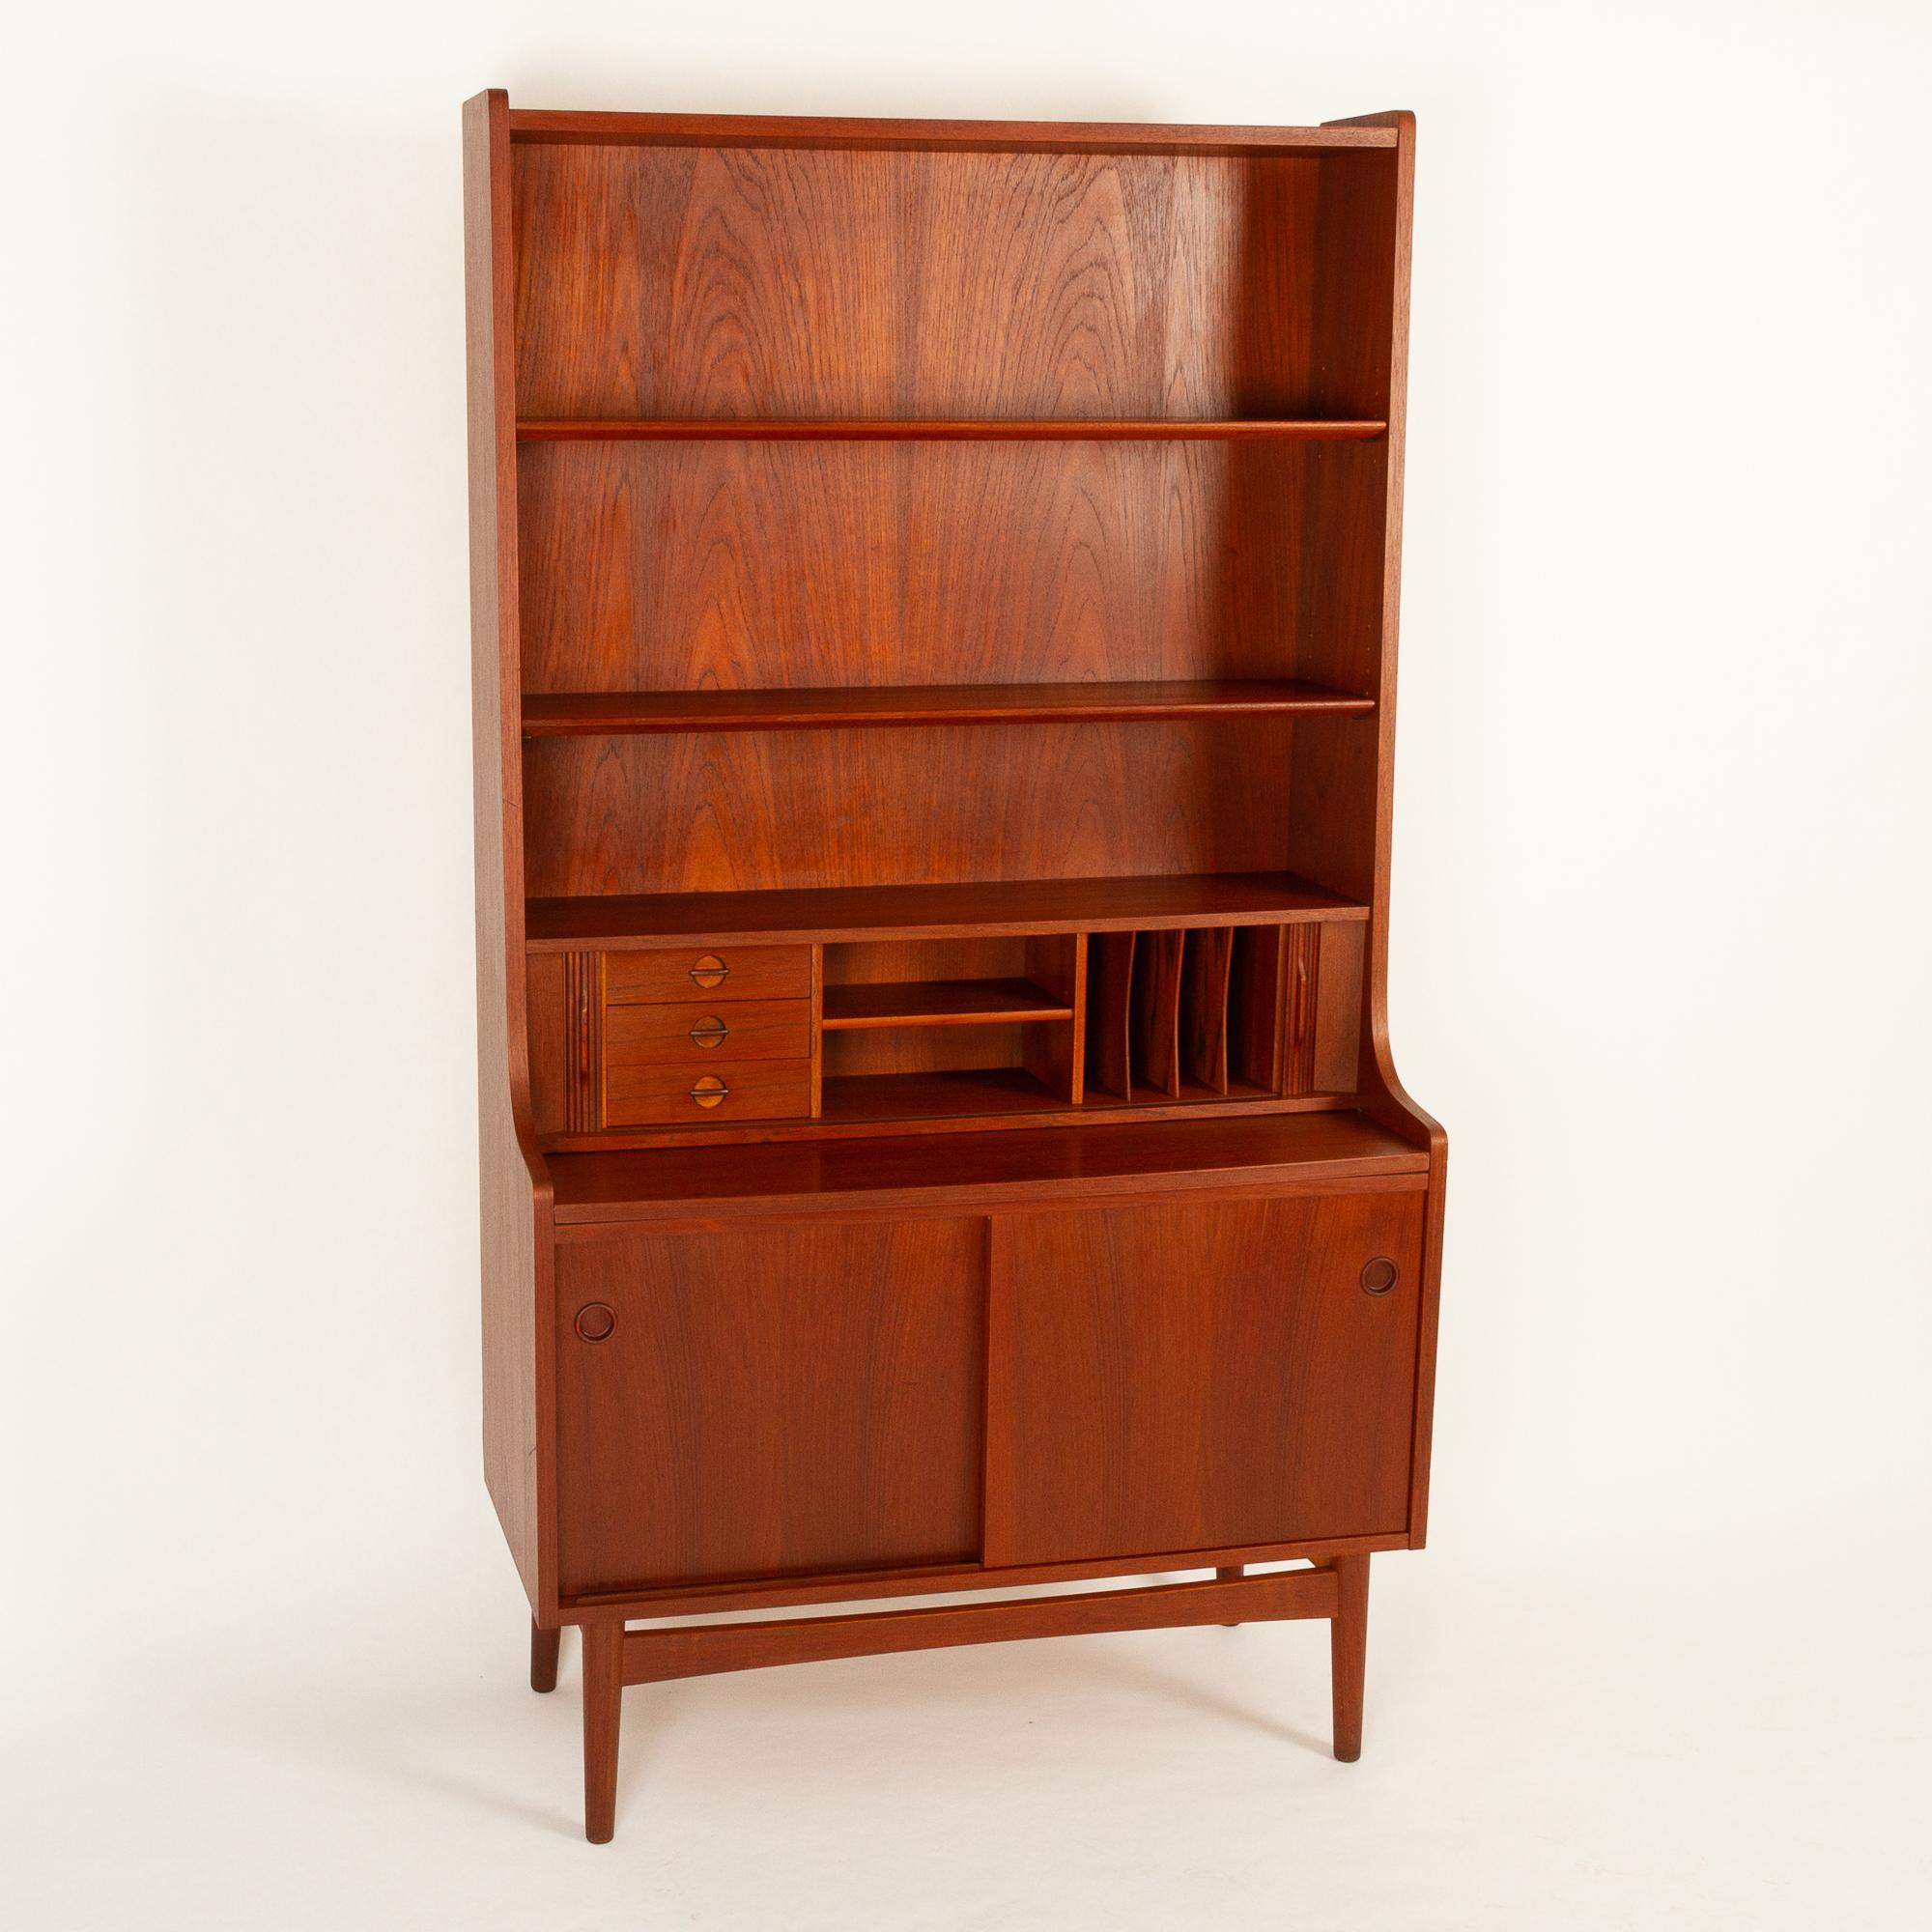 Vintage Danish teak high Secretaire by Johannes Sorth for Bornholms Møbelfabrik, 1960s. Made on the small island of Bornholm.
Tall Mid-Century Modern secretary with draw out tabletop and tambour doors. Desk area with three small drawers, a shelf